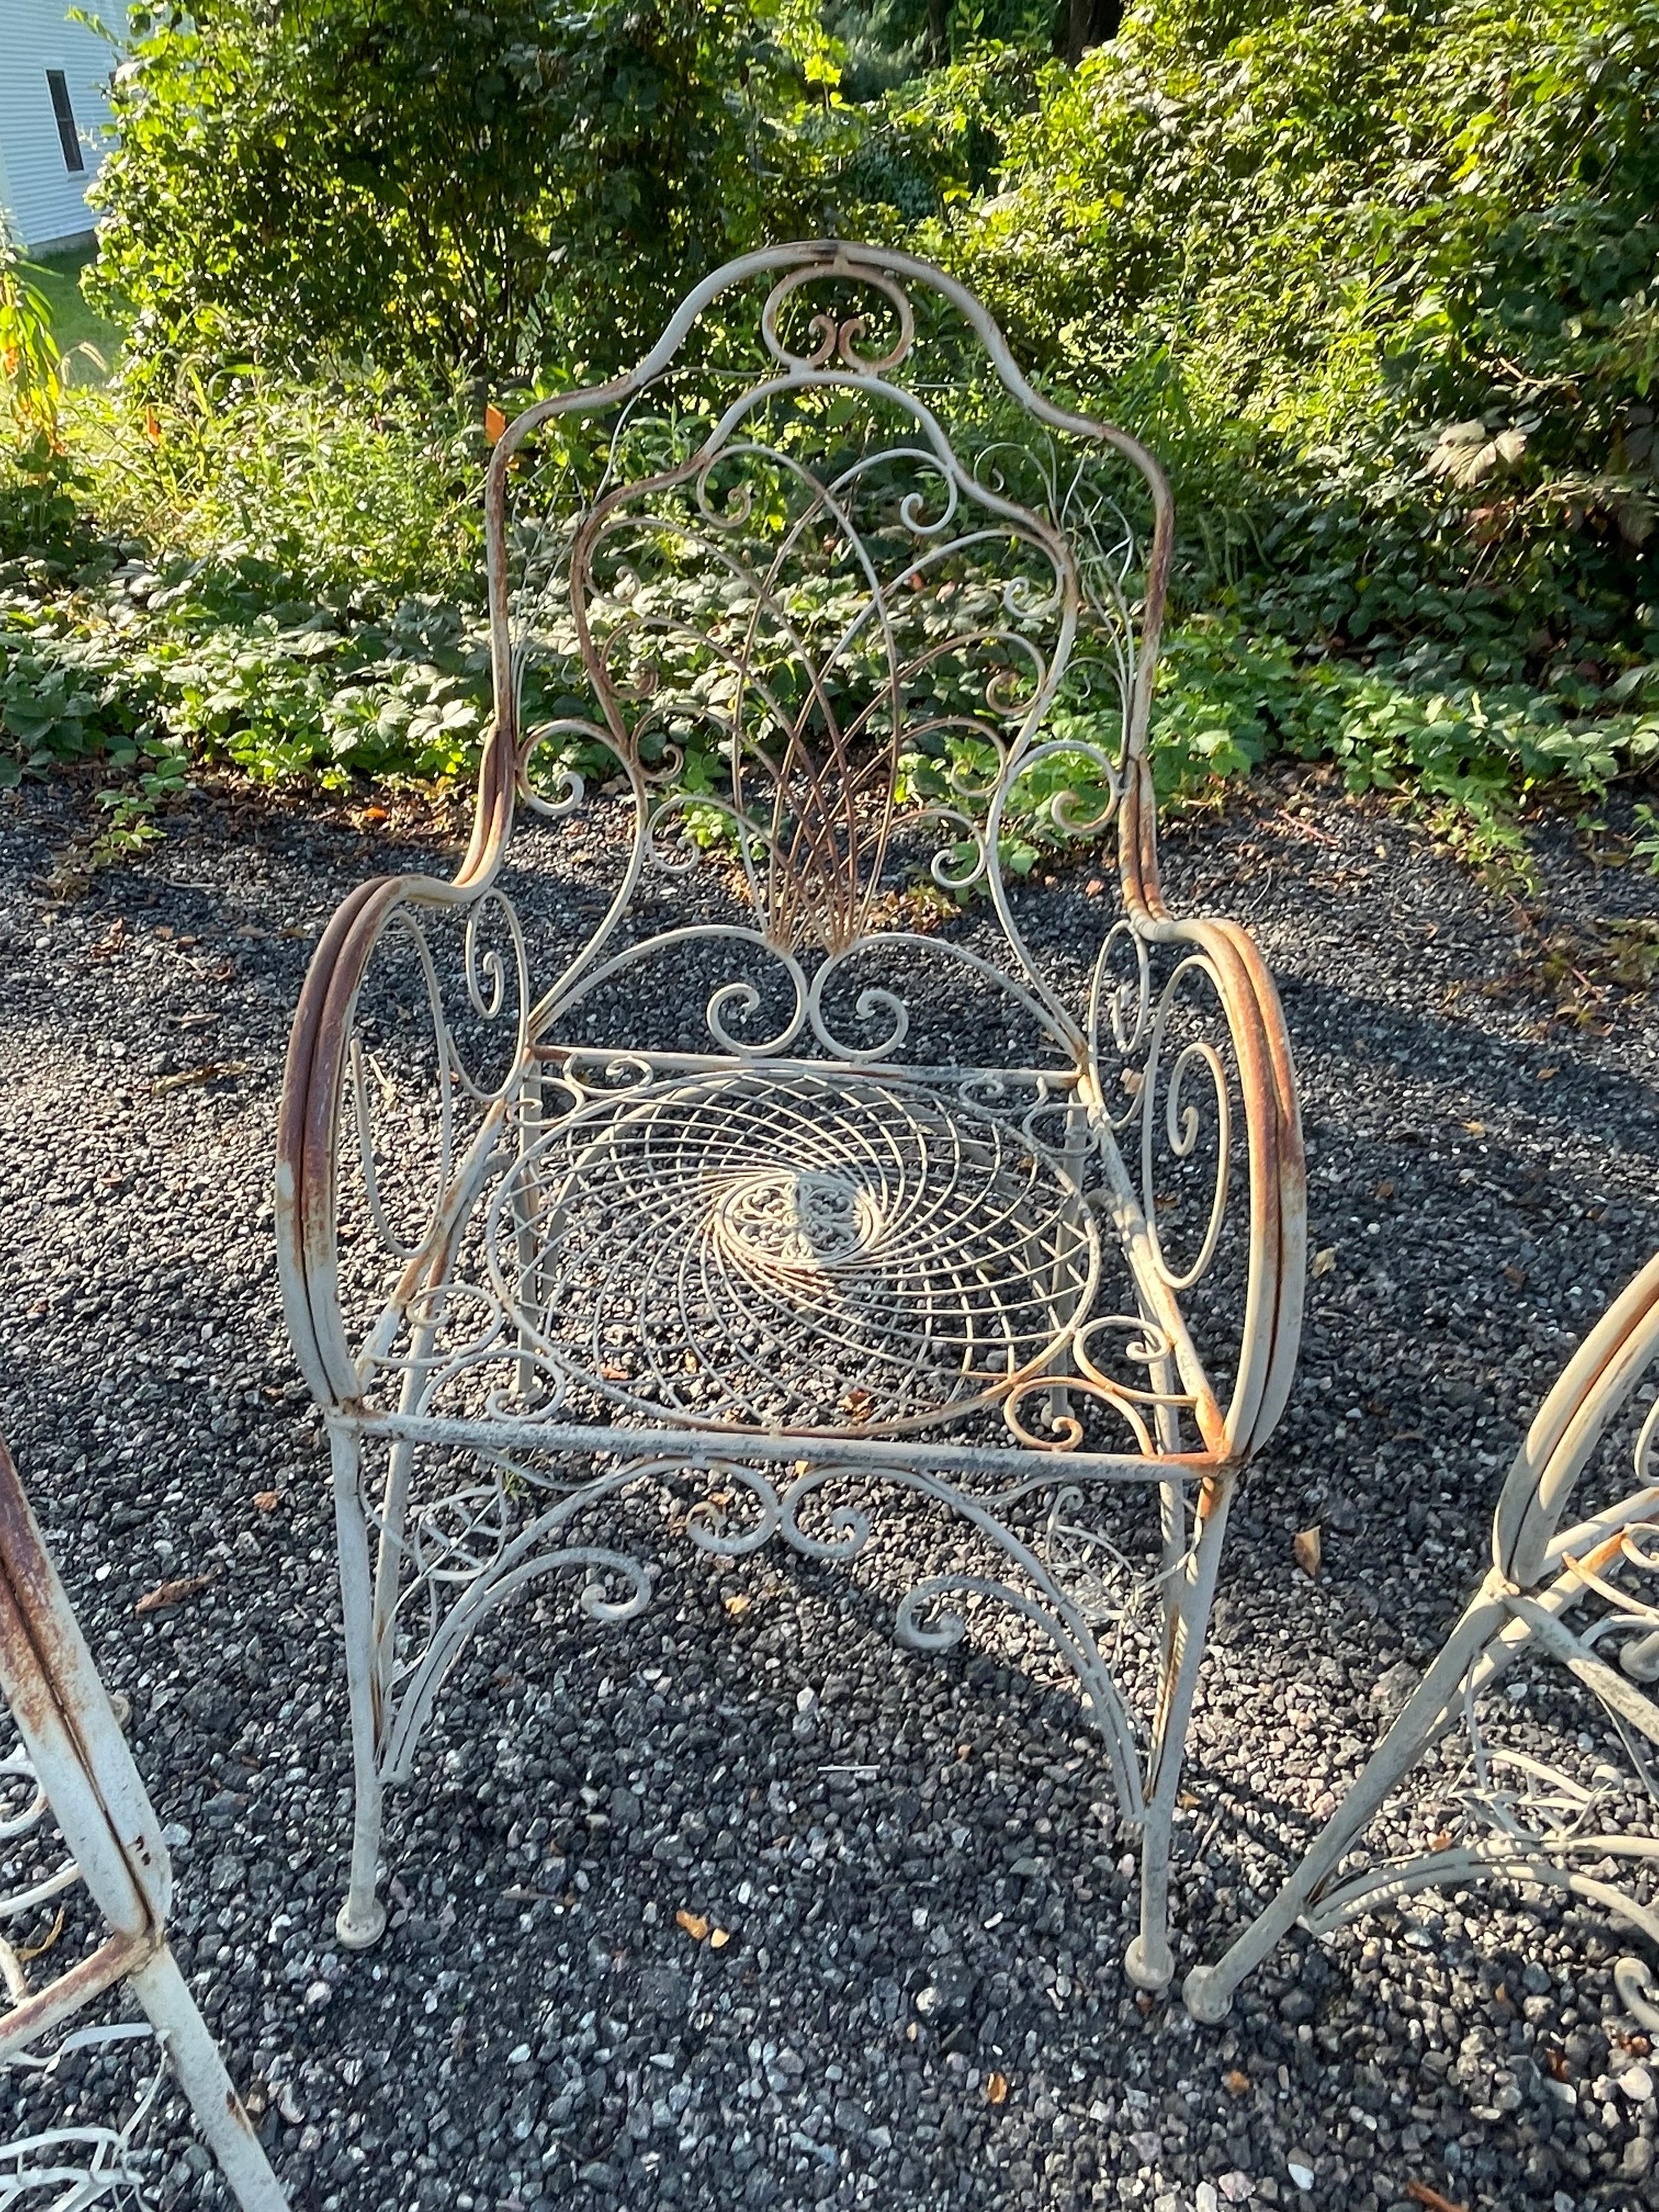 Vintage Wrought Iron Outdoor Patio Furniture In Good Condition For Sale In Cumberland, RI